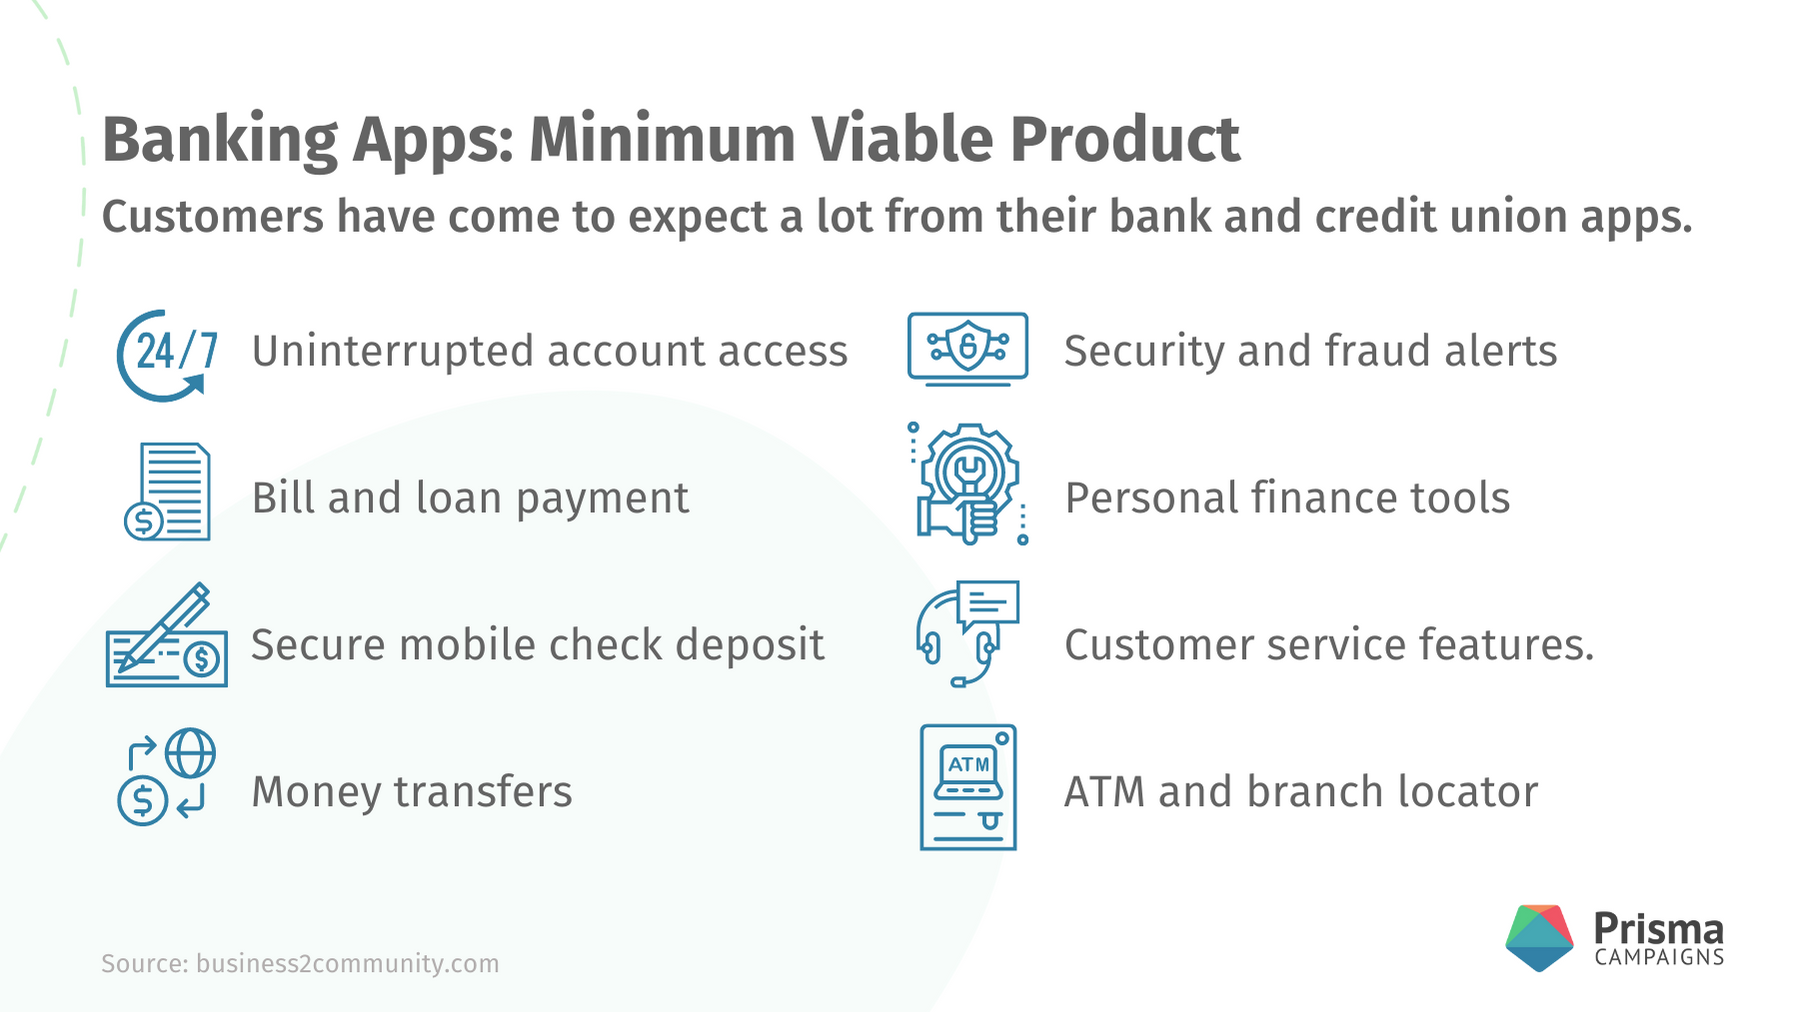 Banking Apps: Minimum Viable Product